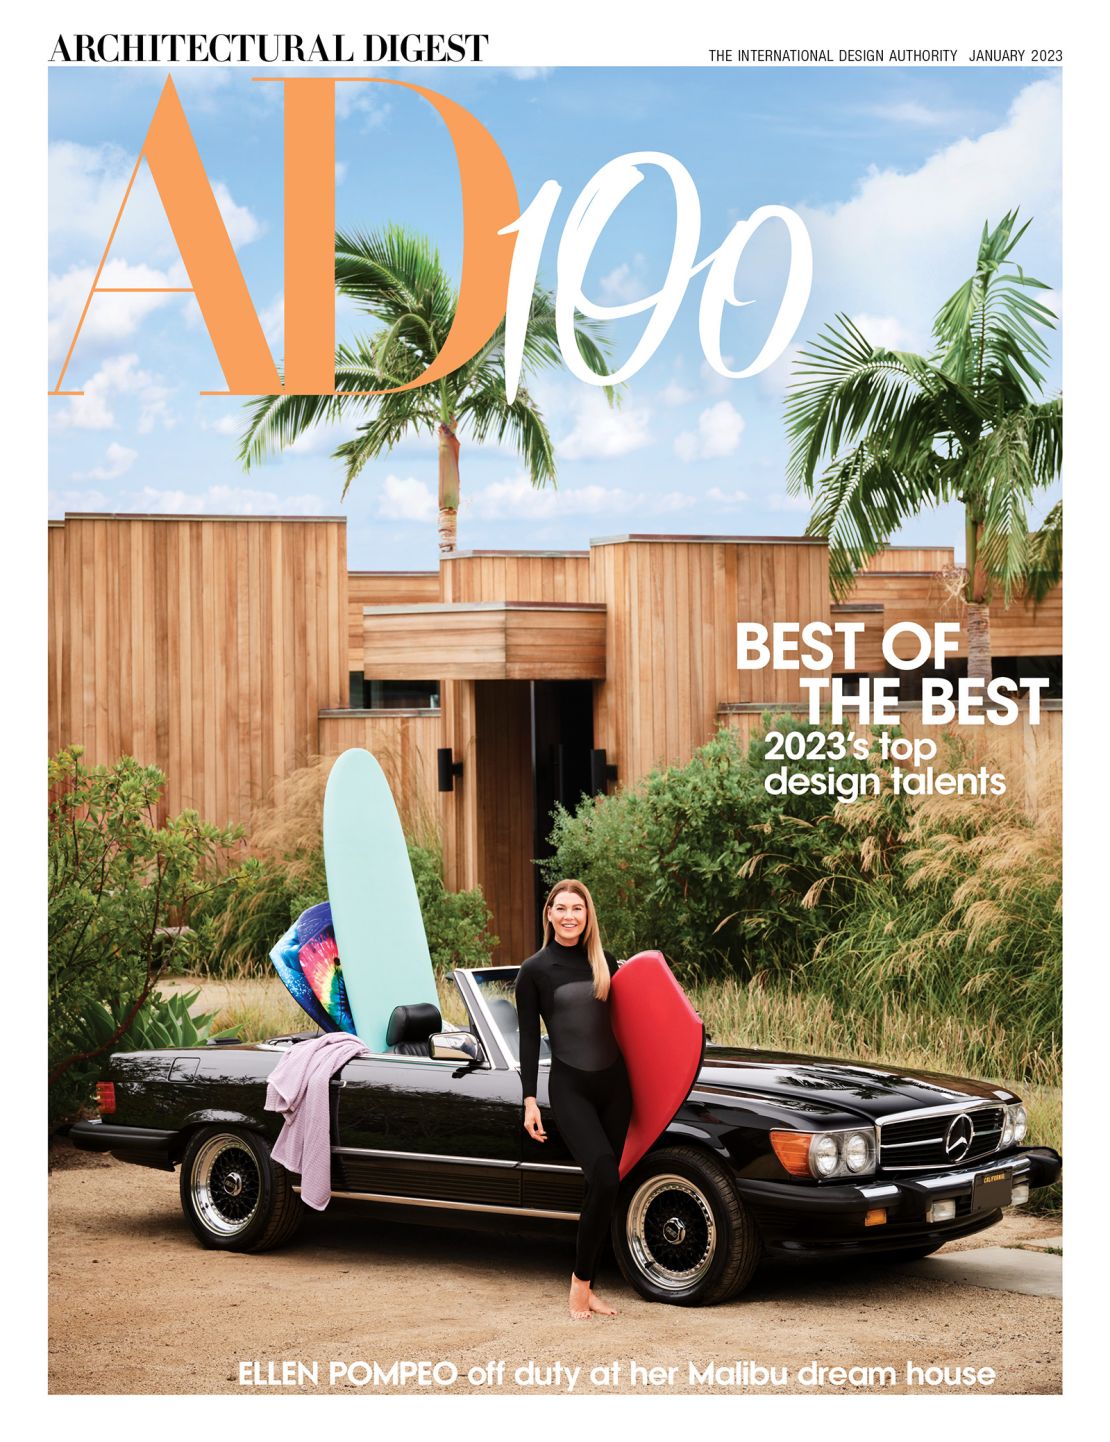 Surf's up! The January 2023 issue of AD offers a tour of Ellen Pompeo's Malibu retreat.